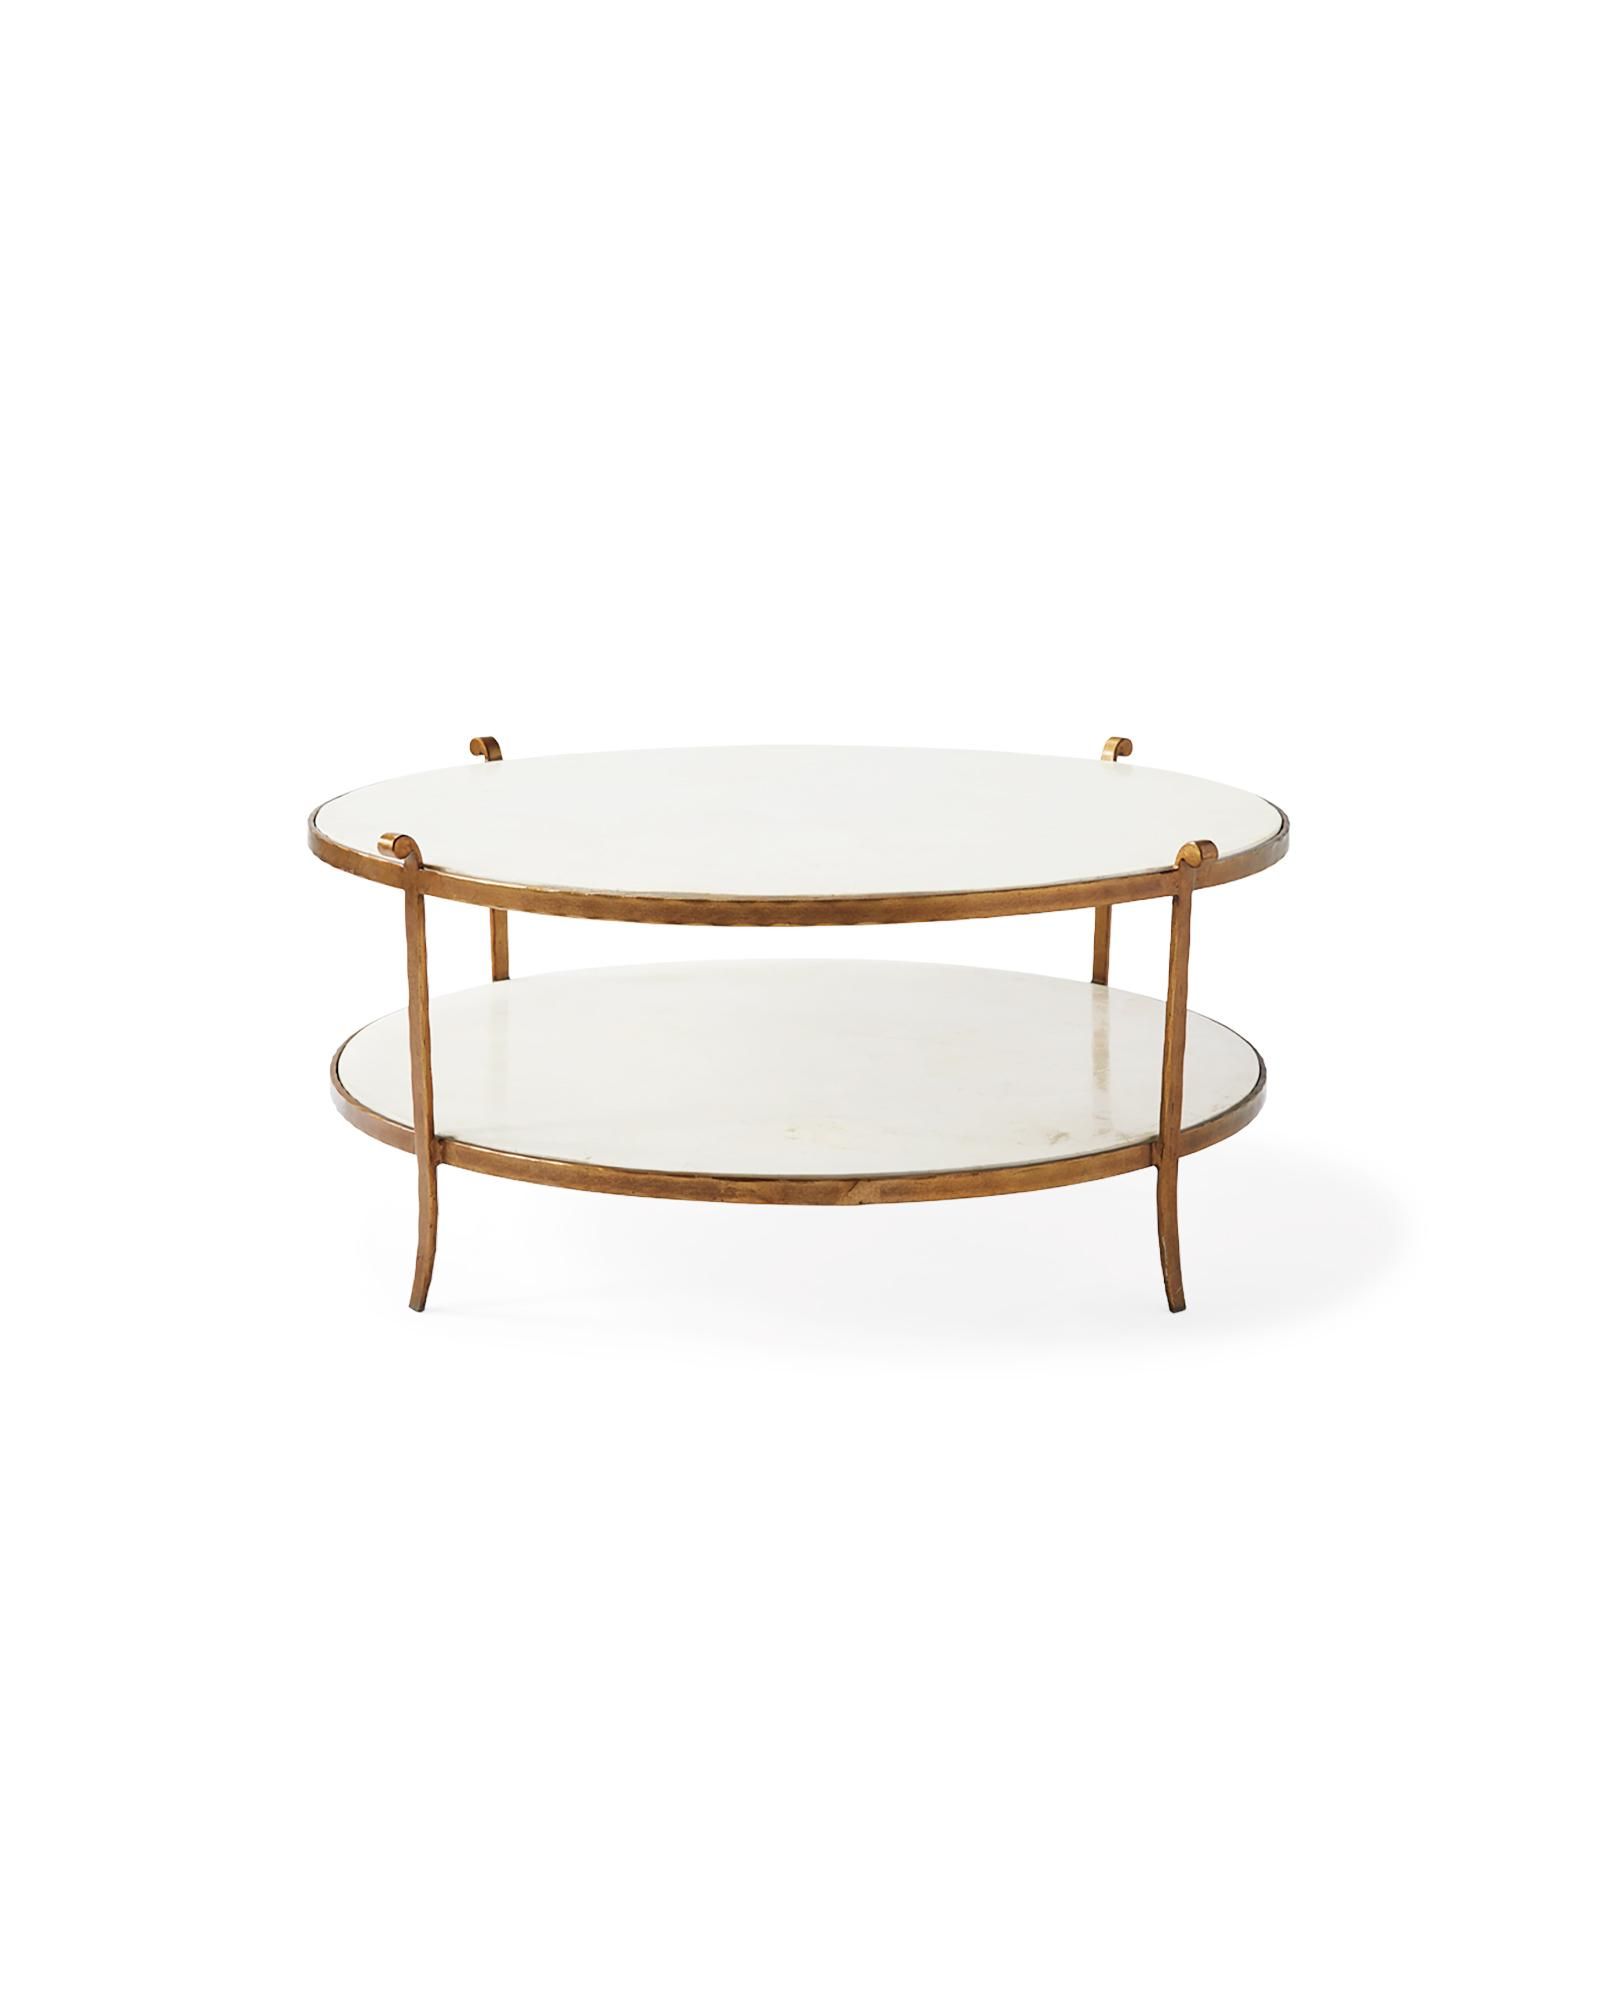 St. Germain Stone Coffee Table | Serena and Lily